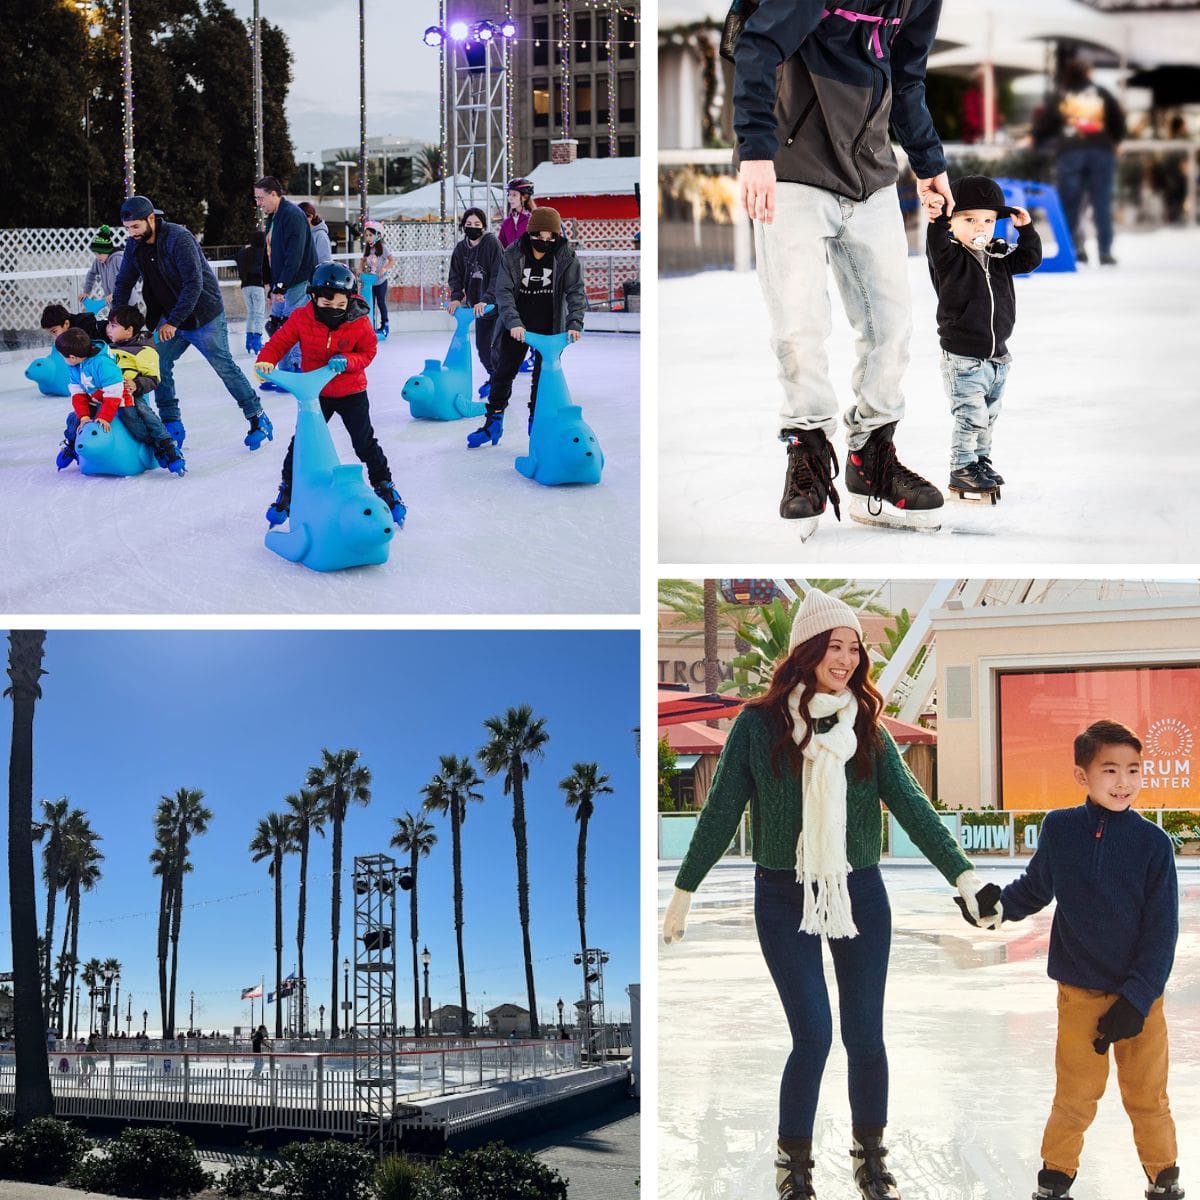 Best Ice Skating Rinks for the Holiday Season